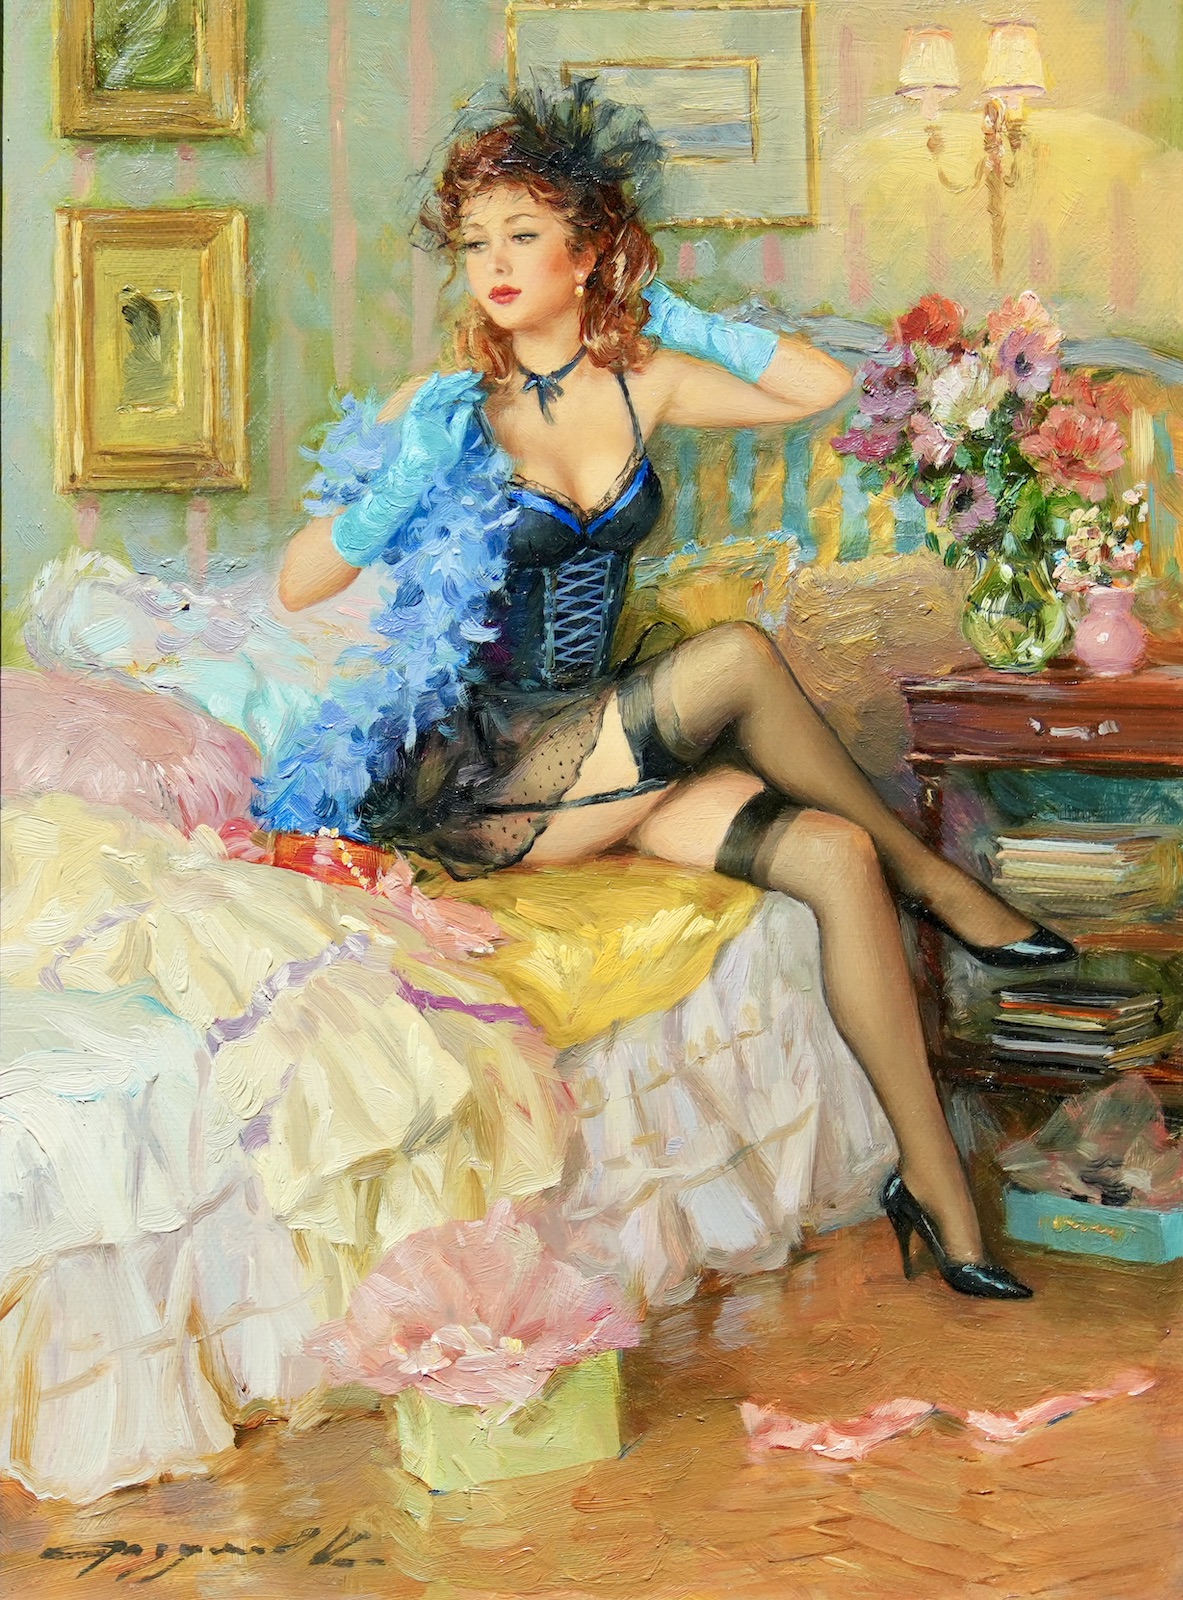 Girl in bedroom with blue feather